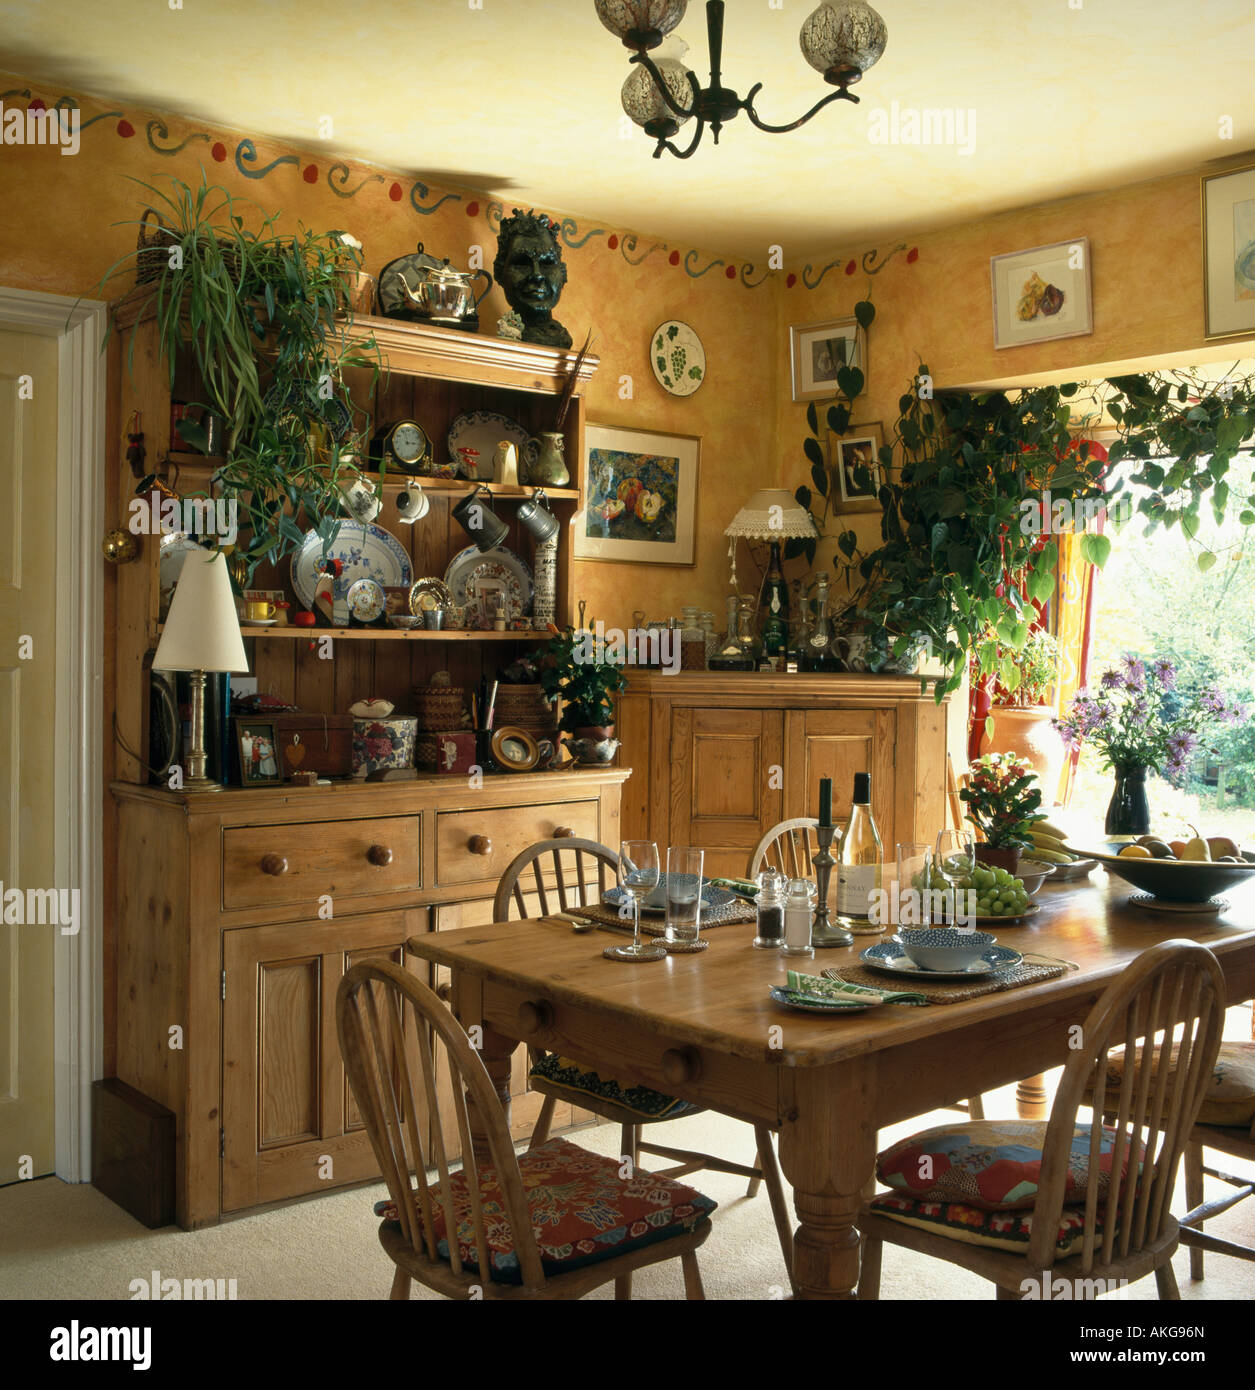 Small pine dresser and dining table in yellow dining room with painted  border on the wall Stock Photo - Alamy